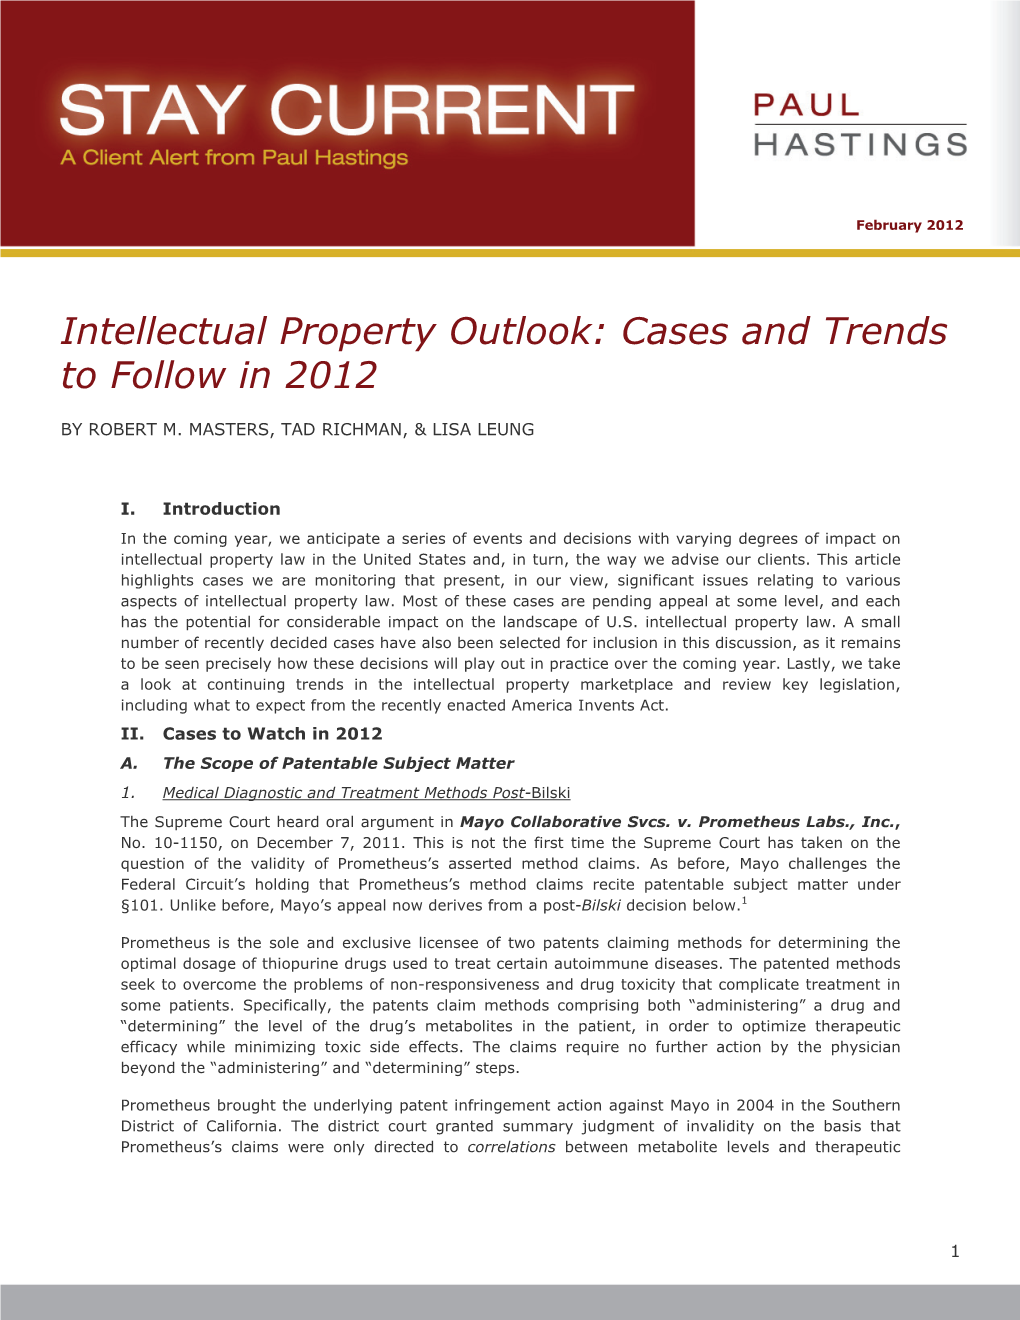 Intellectual Property Outlook: Cases and Trends to Follow in 2012